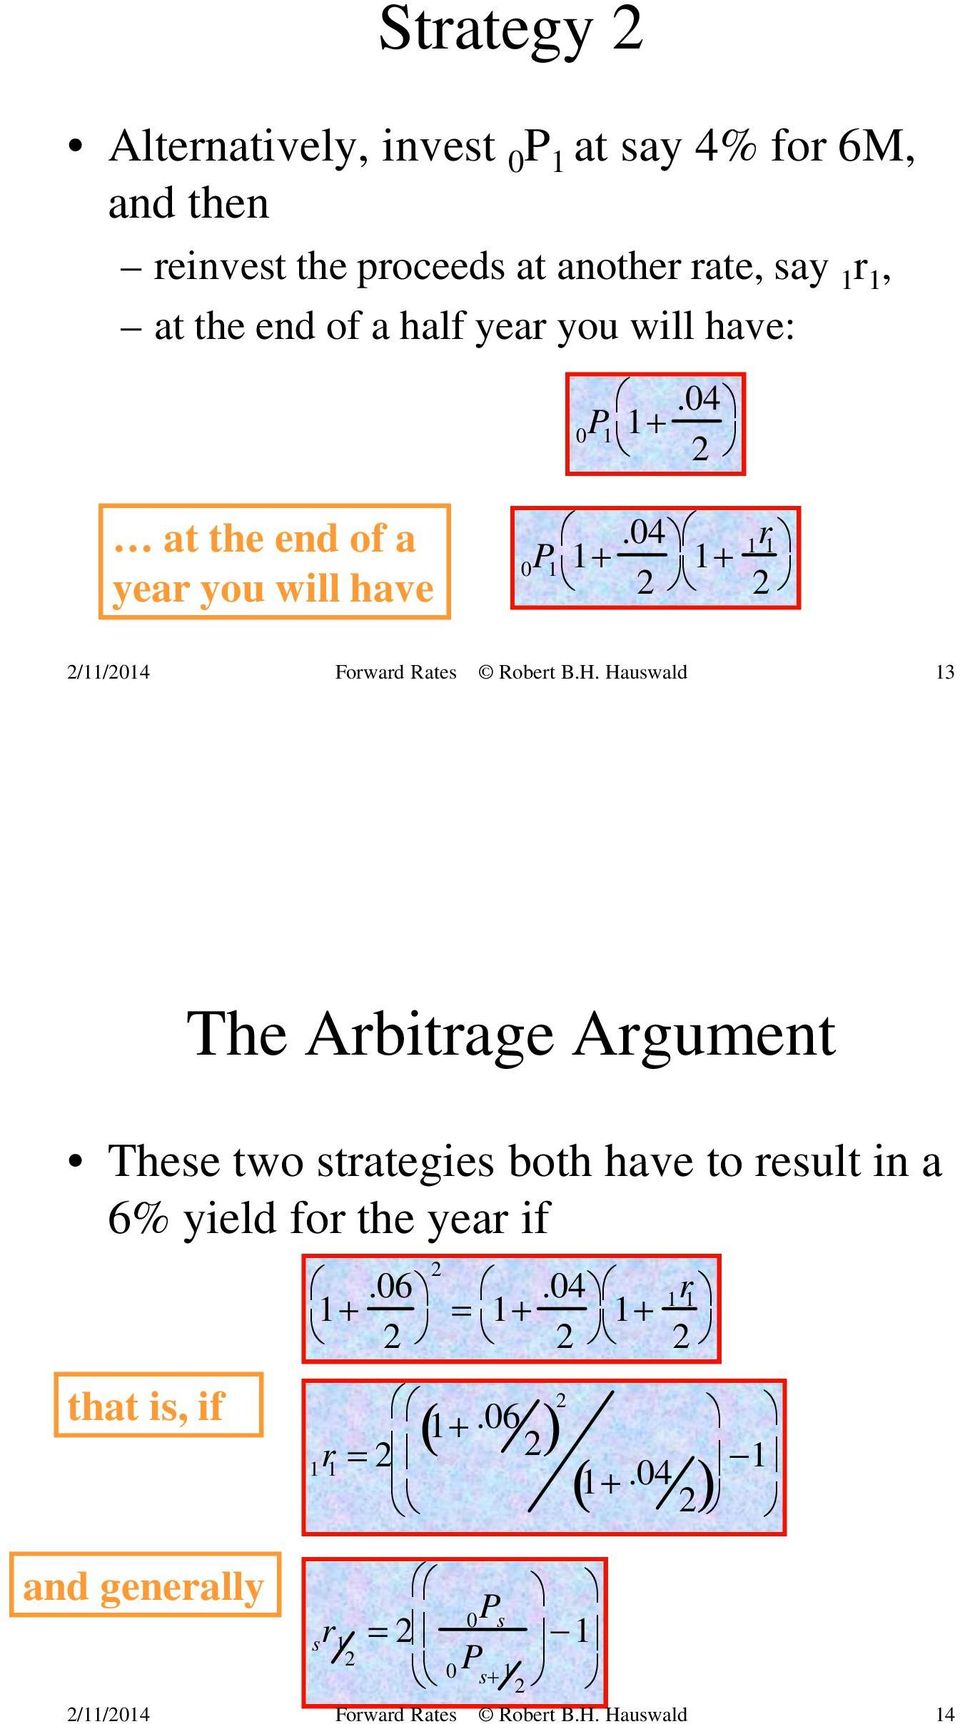 04 2 1+ r 1 1 2 13 The Arbitrage Argument These two strategies both have to result in a 6% yield for the year if